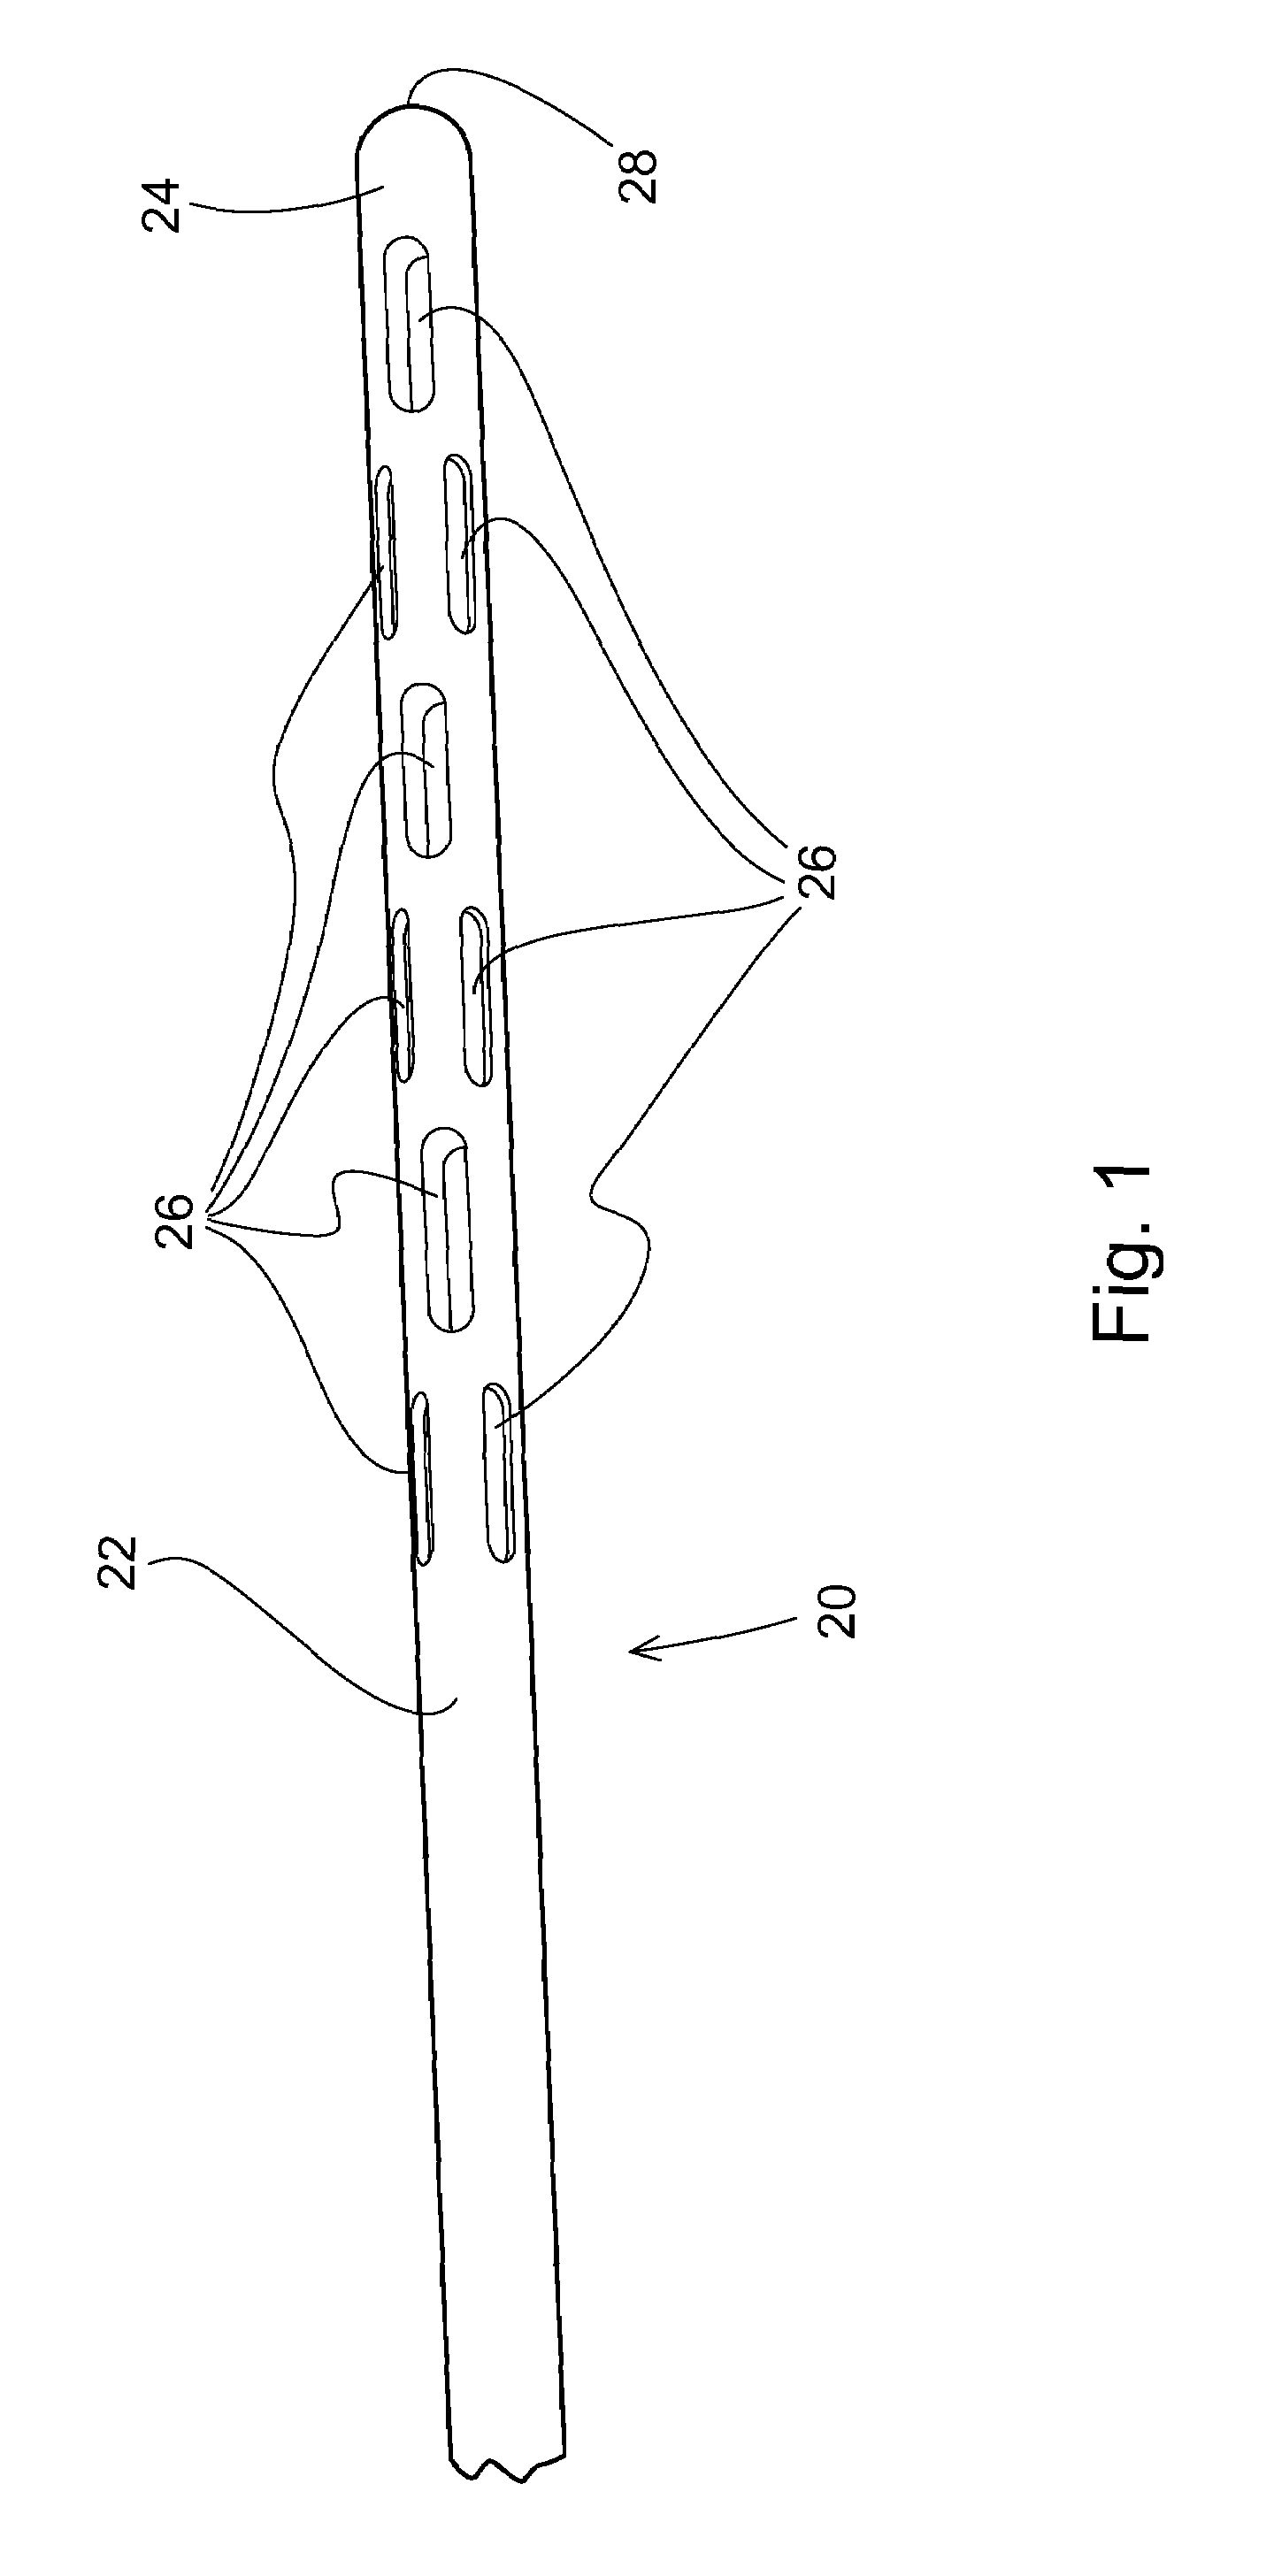 Closed System and Method for Atraumatic, Low Pressure, Continuous Harvesting, Processing, and Grafting of Lipoaspirate